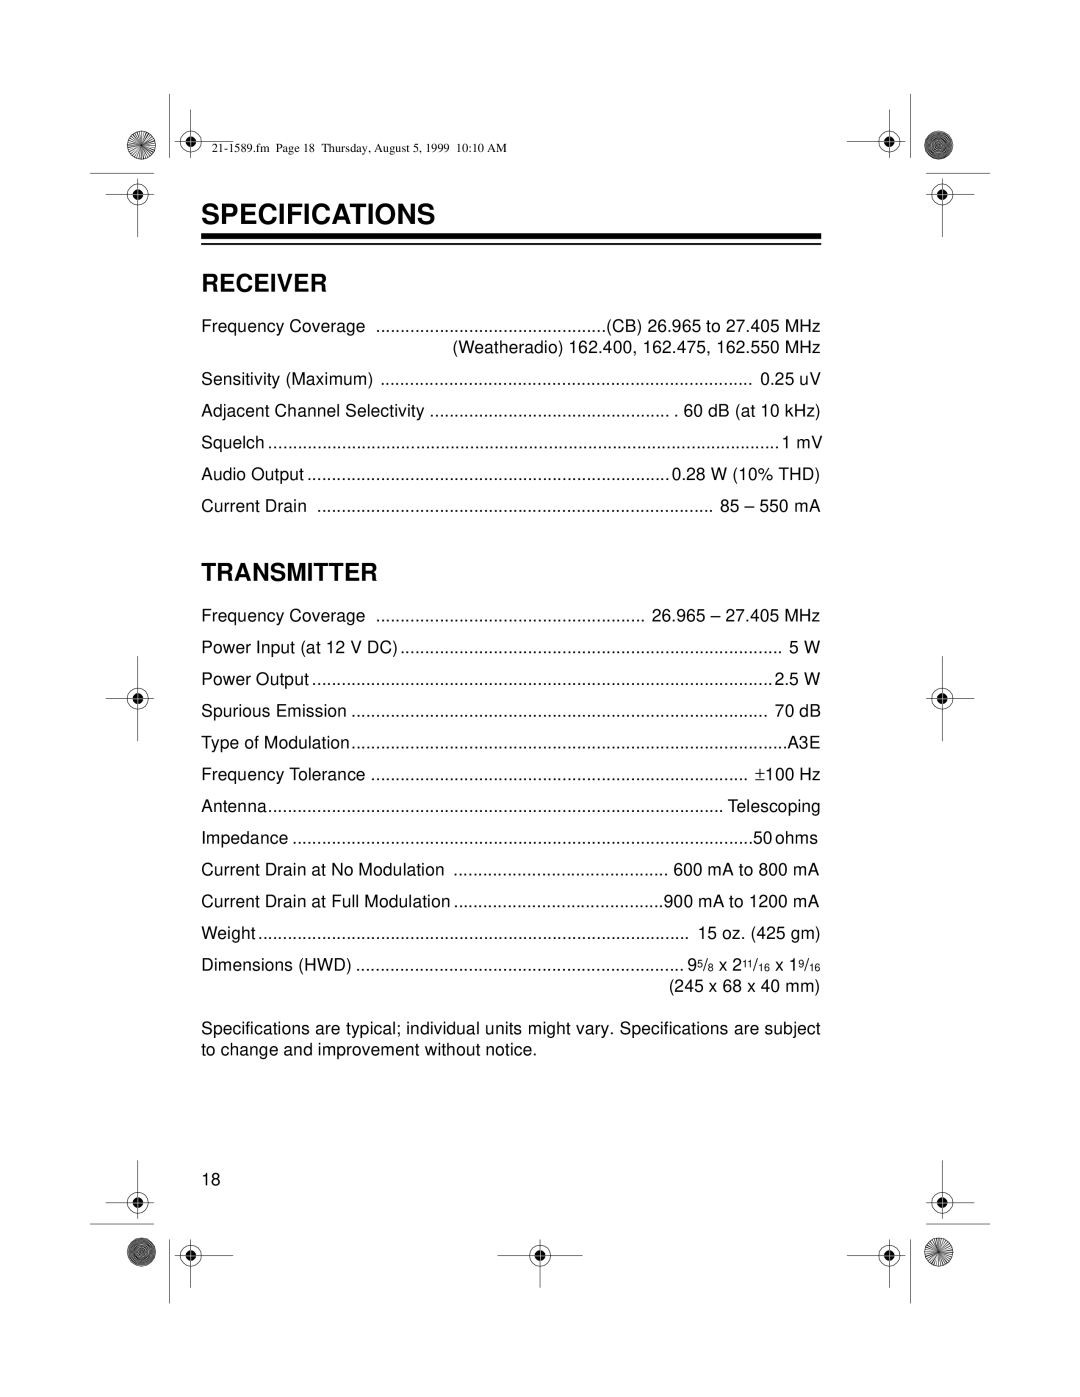 Radio Shack TRC-494 owner manual Specifications, Receiver, Transmitter 